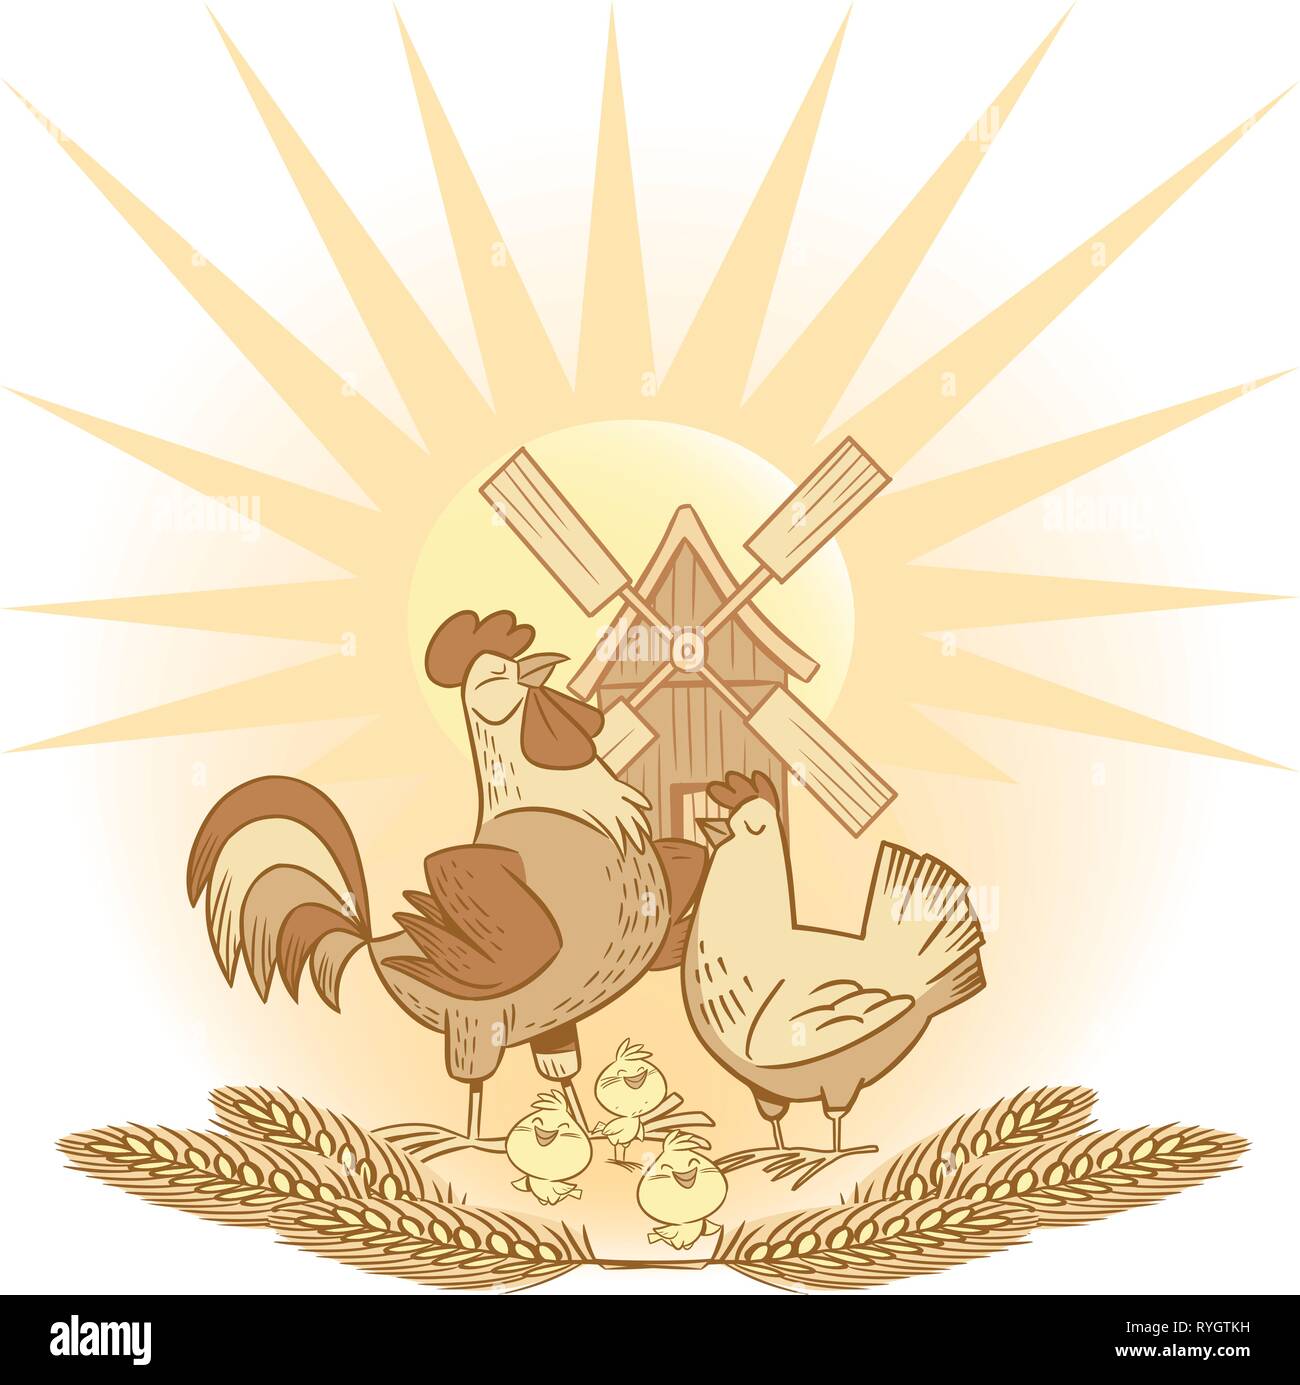 The illustration shows a group of hens and chickens, wheat ears on a background of sun and windmill. Illustration done on separate layers. Stock Vector